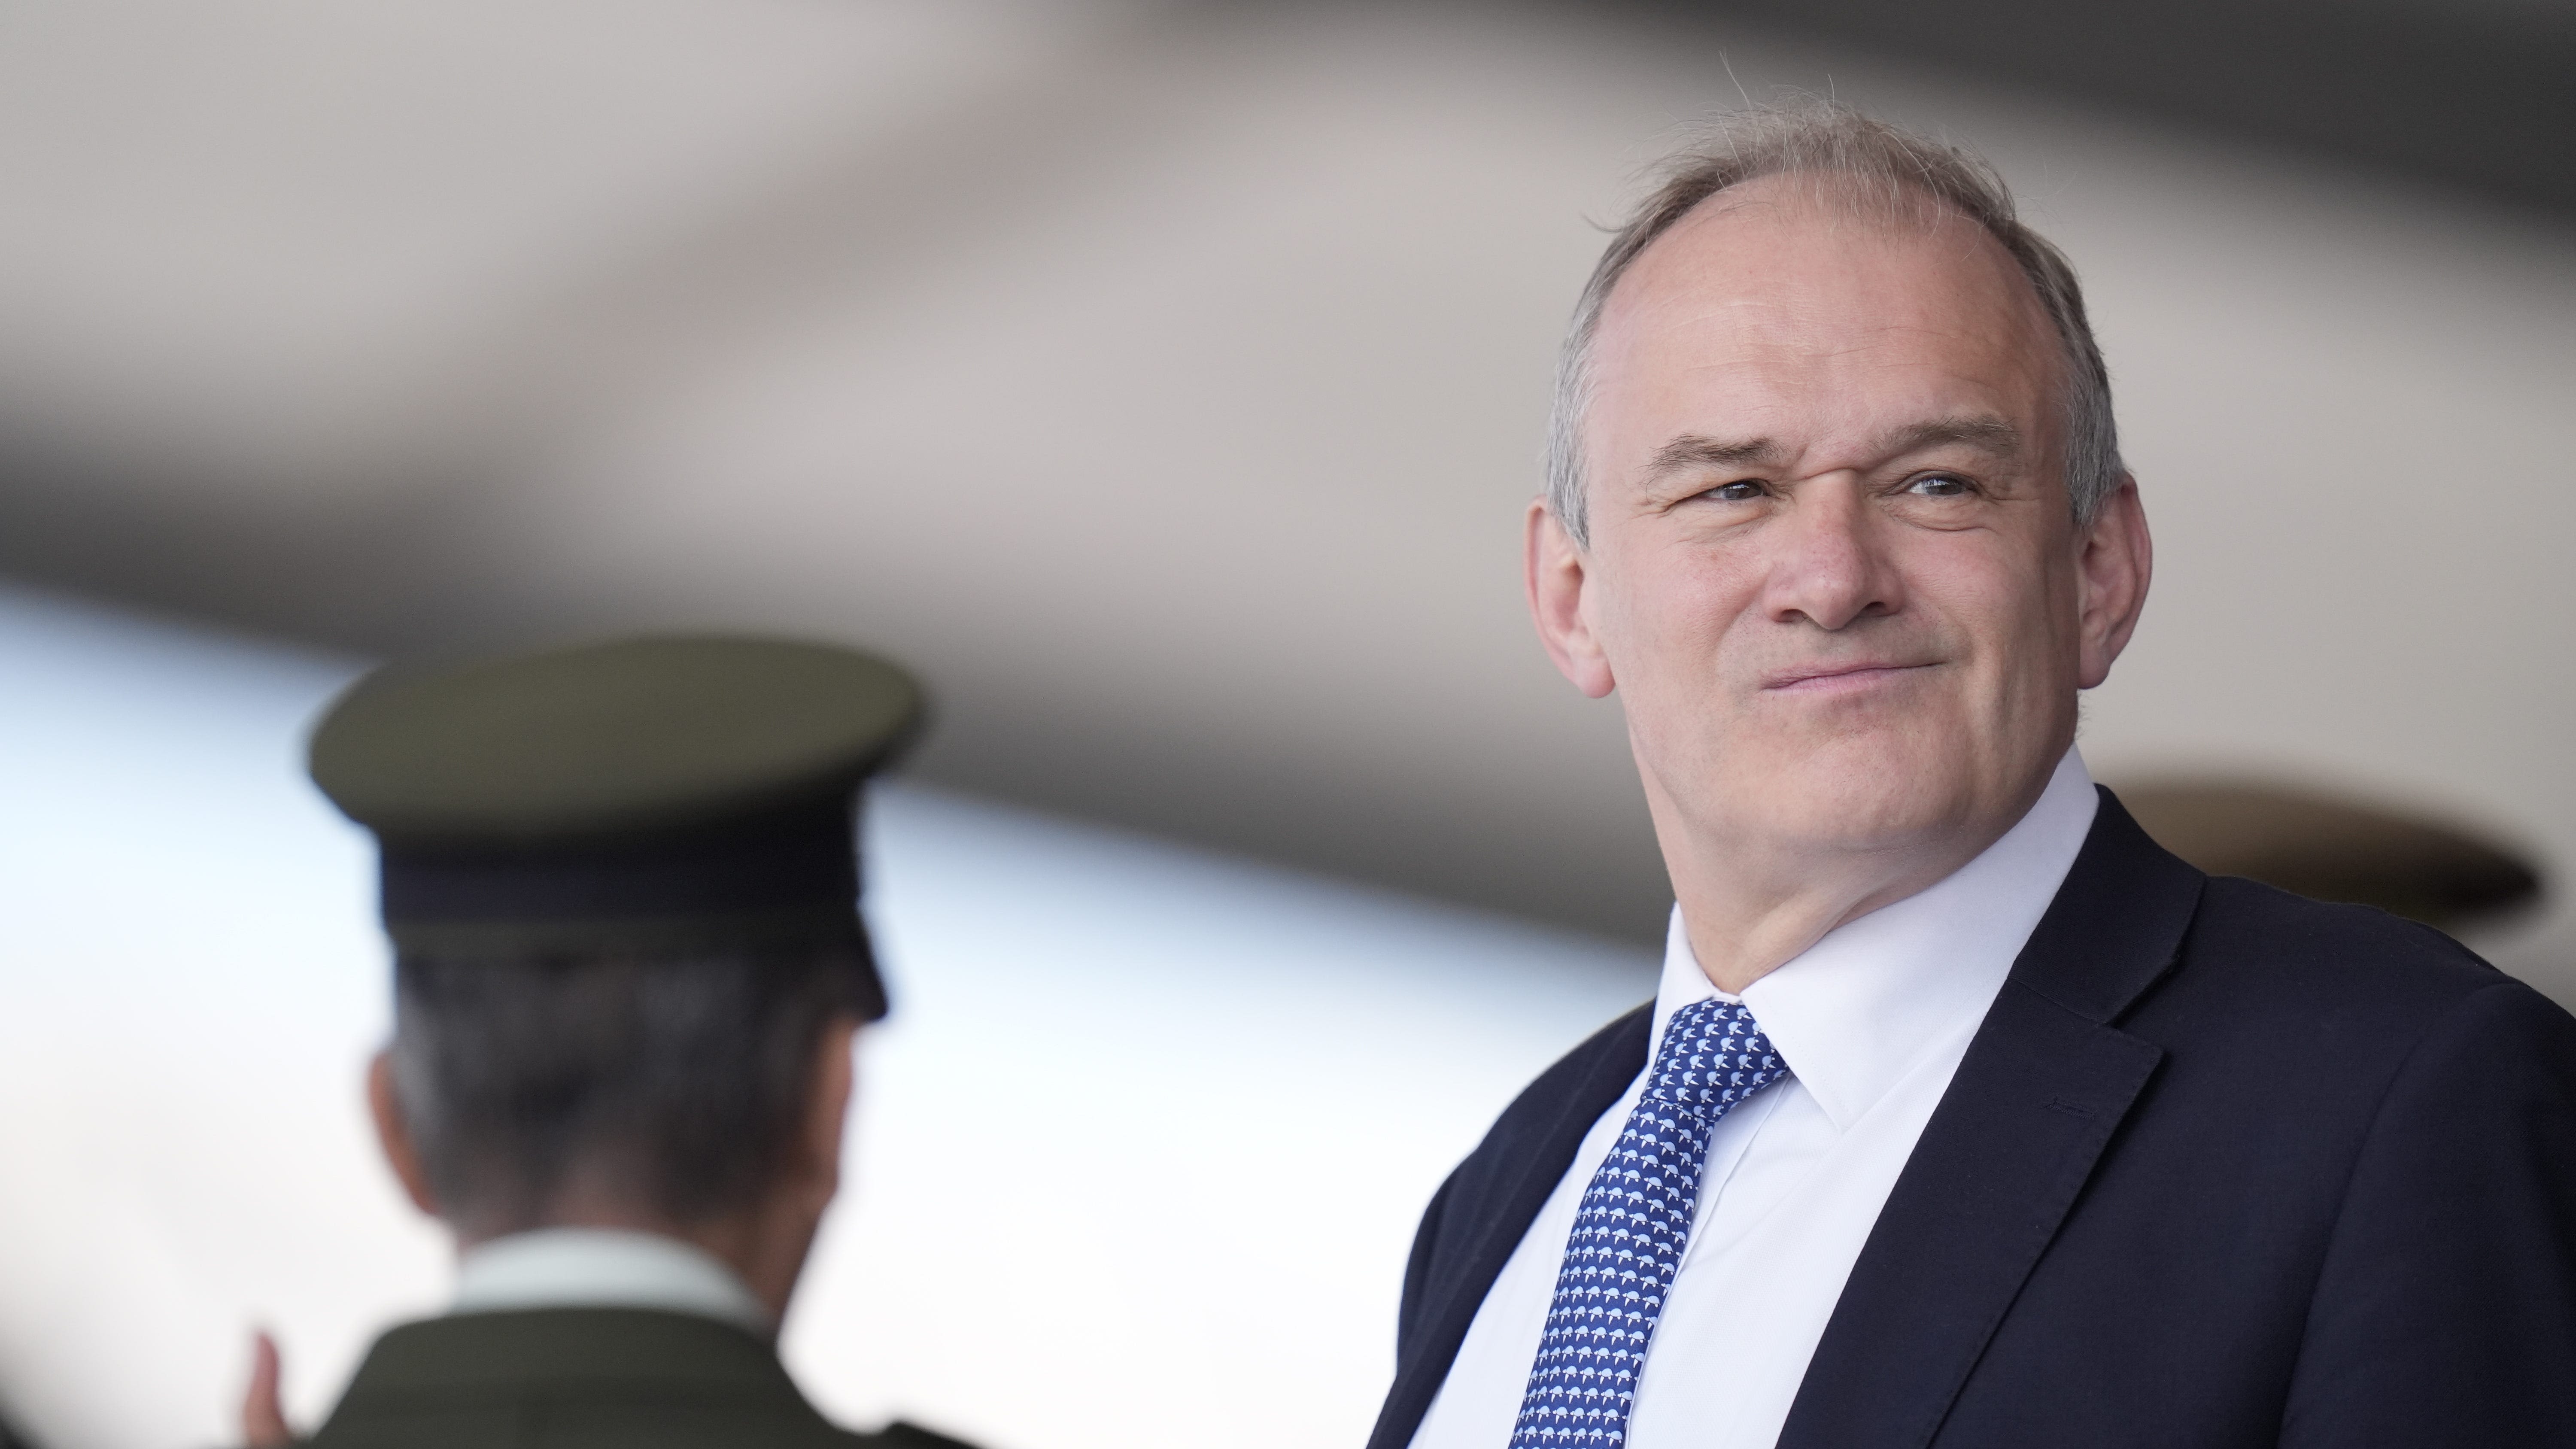 ‘Others can make their own views’ about campaign trail stunts, Sir Ed Davey says